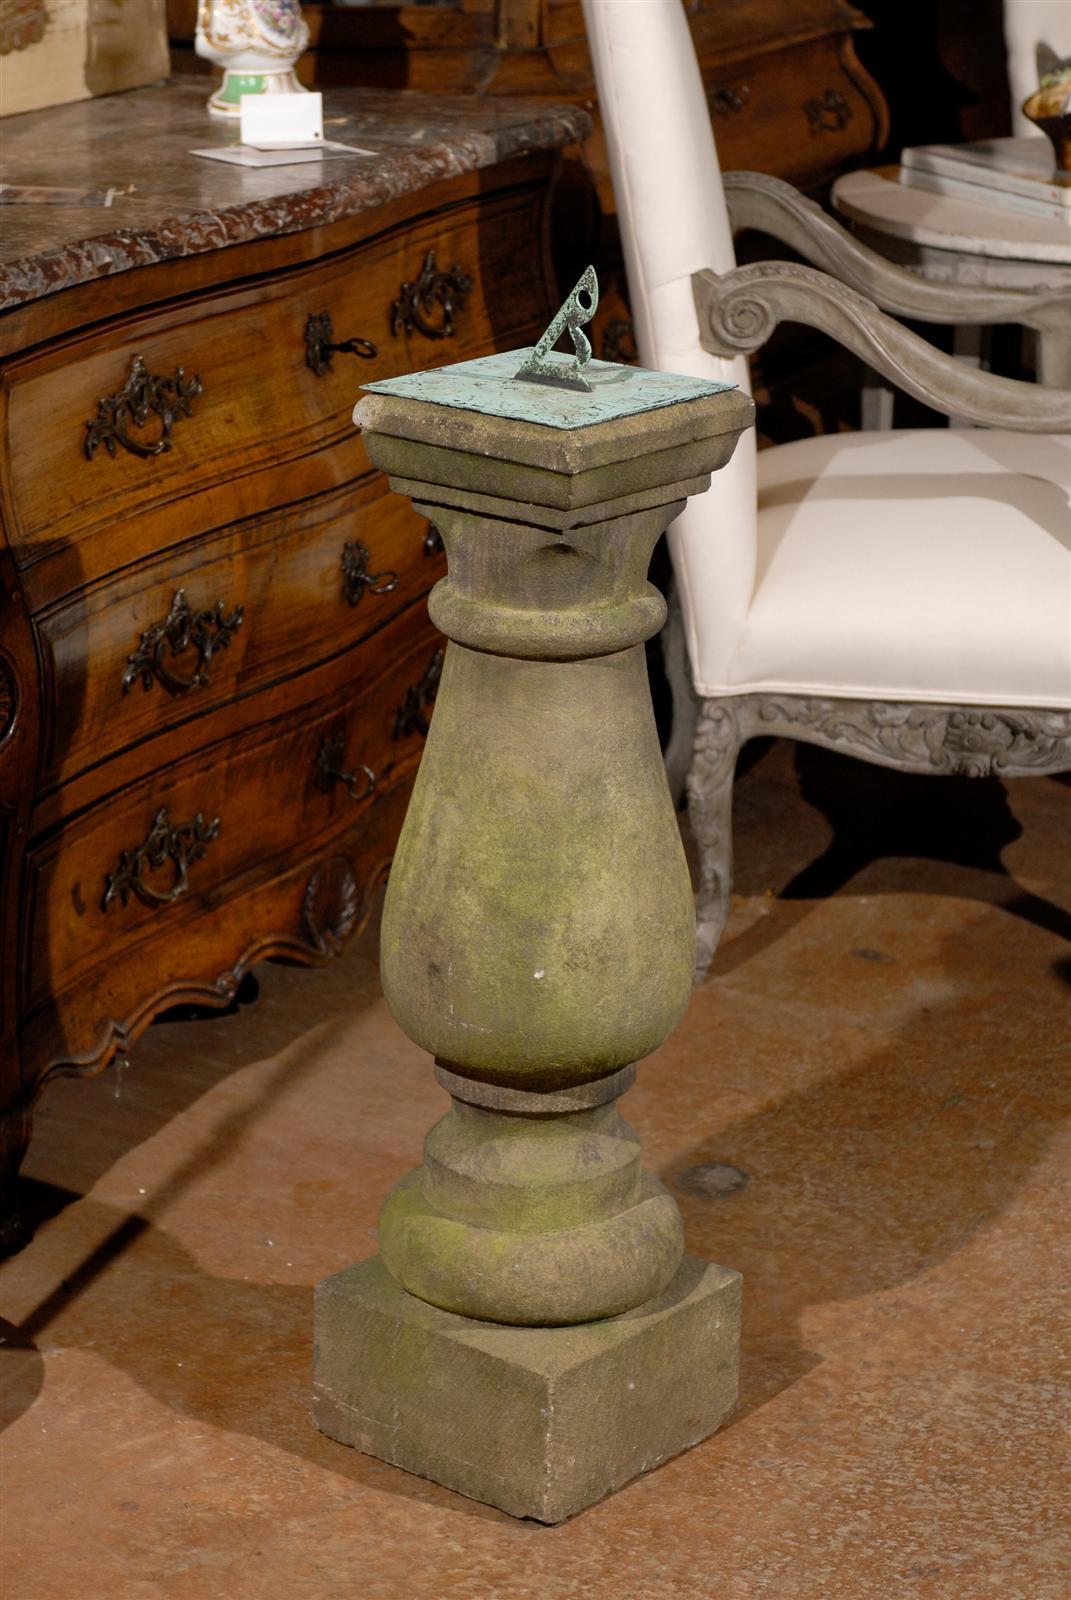 An English sandstone baluster-shaped sundial with bronze dial from the mid 19th century. This English sundial features a lovely baluster shape, topped with a bronze dial revealing a lovely verdigris, an exquisite green patina, typical of